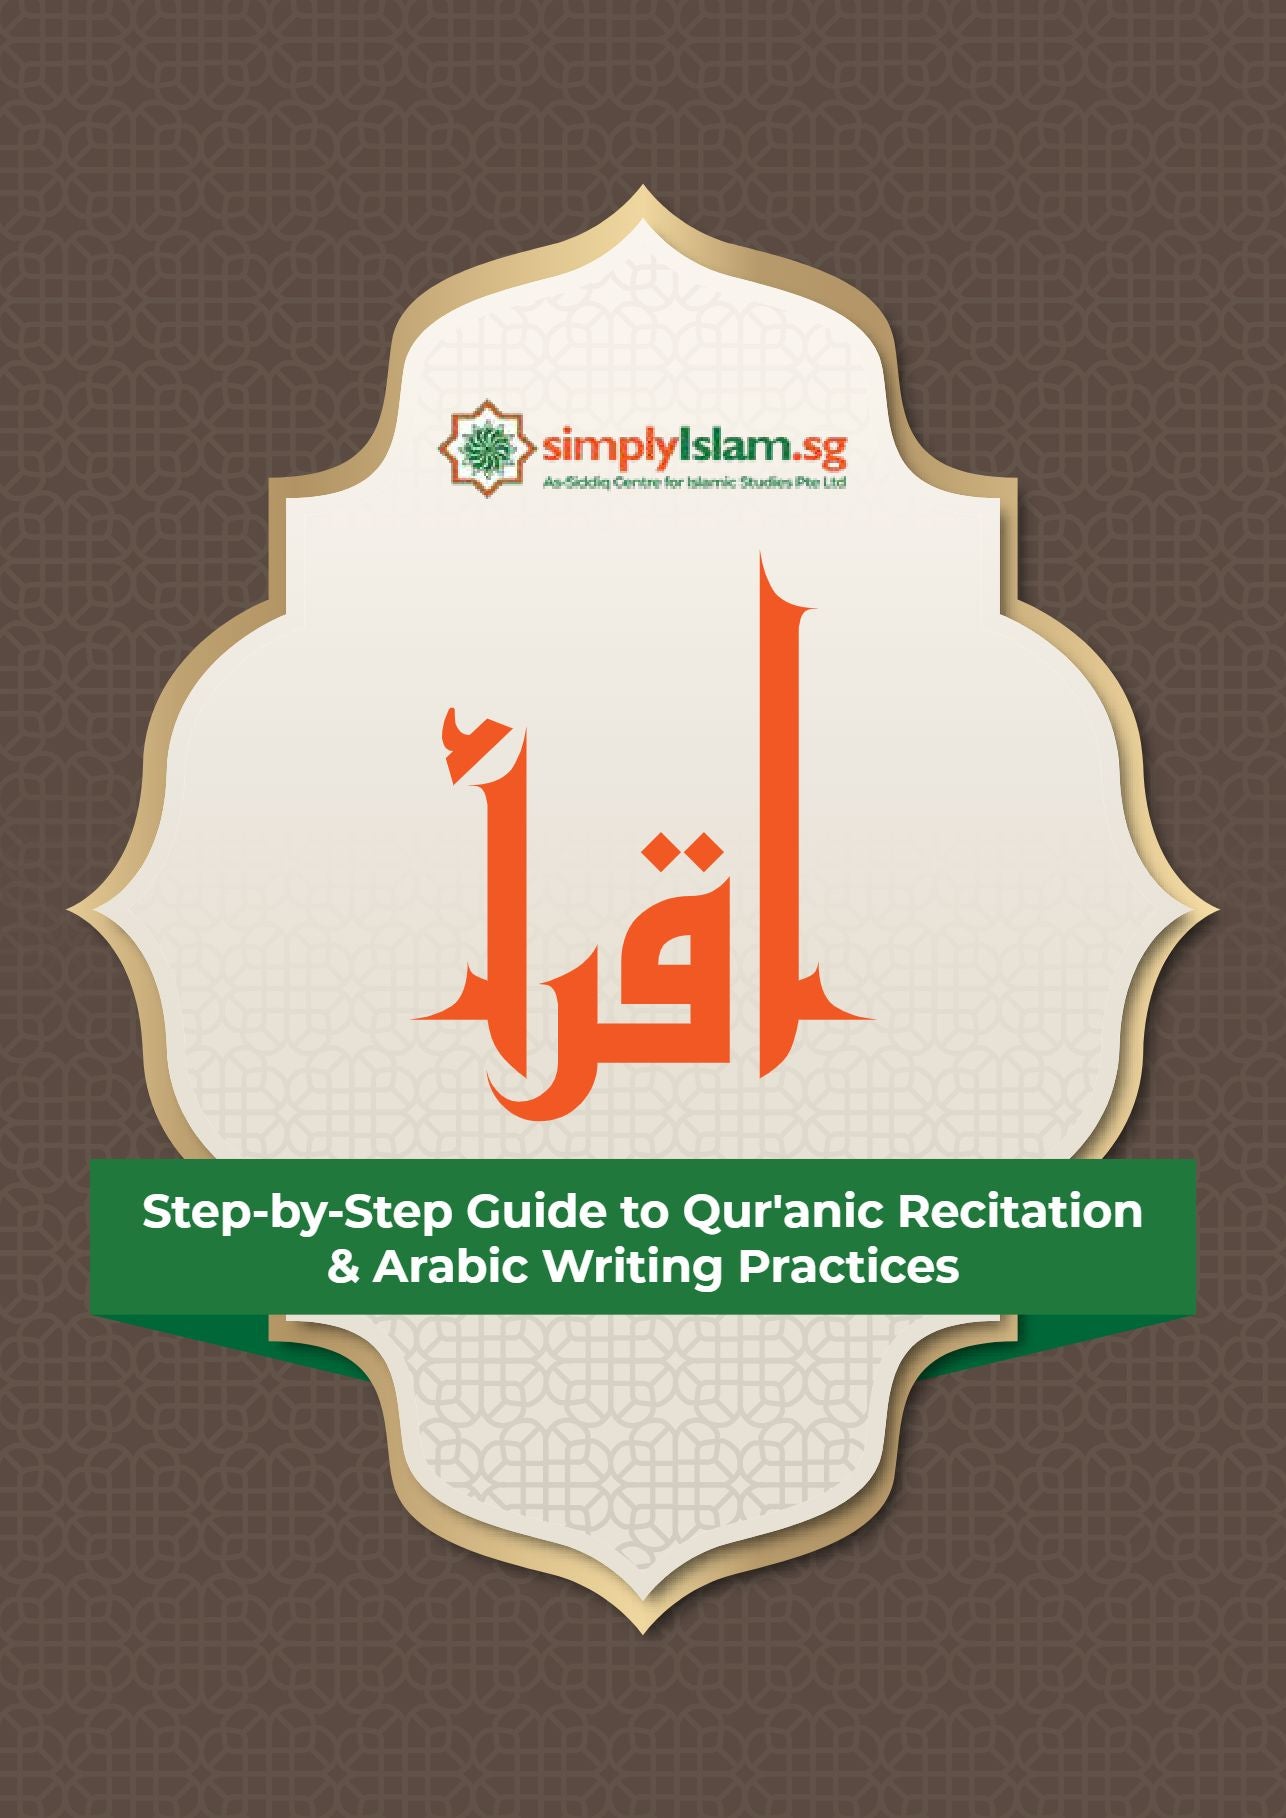 Step- by- Step Guide to Qur'anic Recitation & Arabic Writing Practices